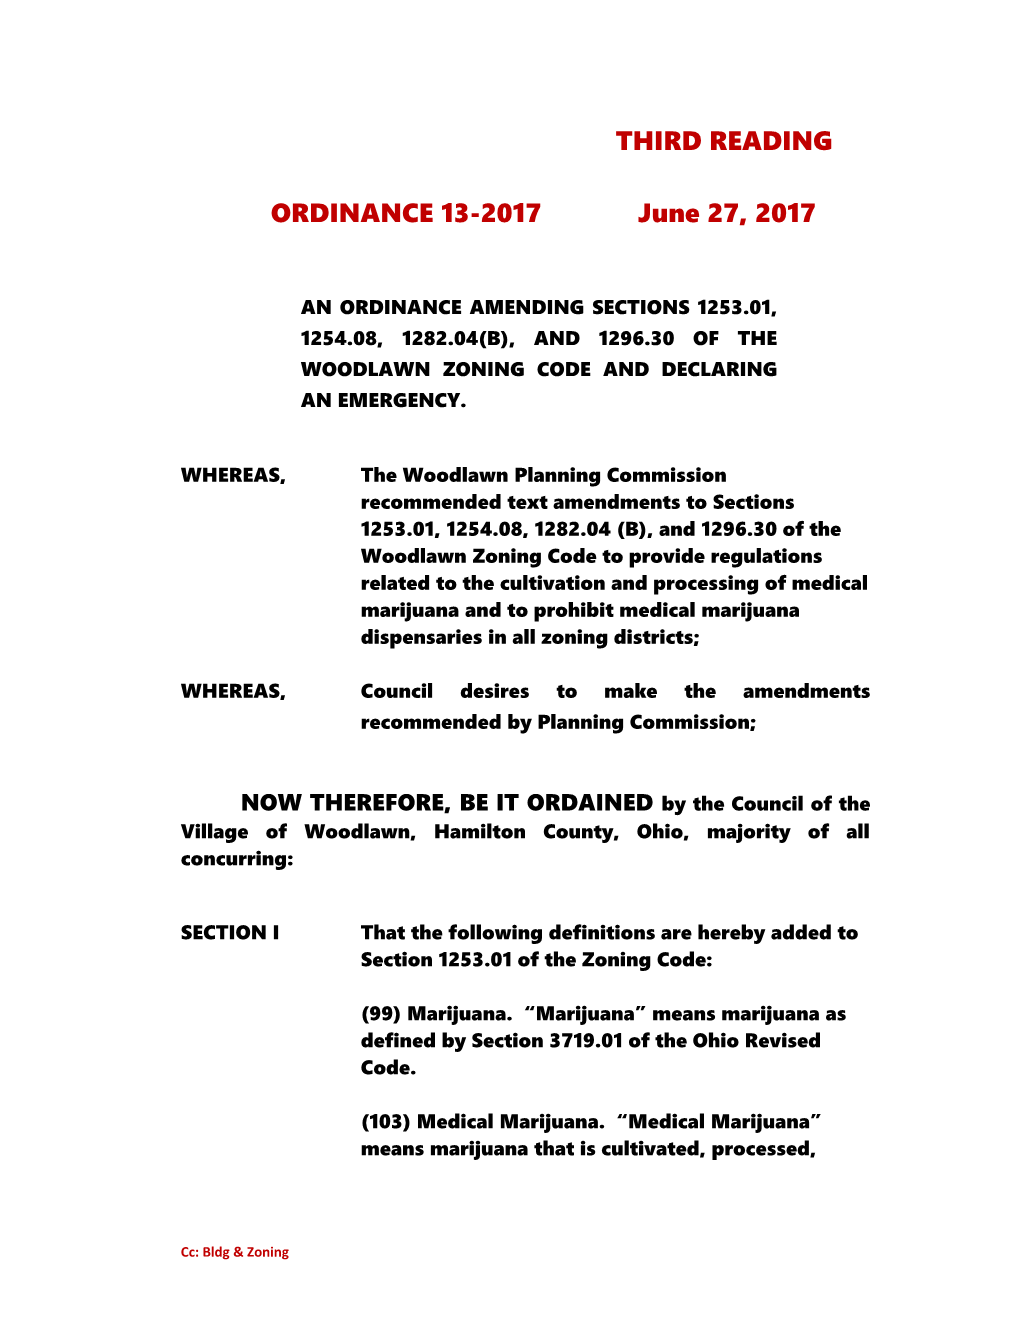 An Ordinance Amending Sections 1253.01, 1254.08, 1282.04(B), and 1296.30 of the Woodlawn